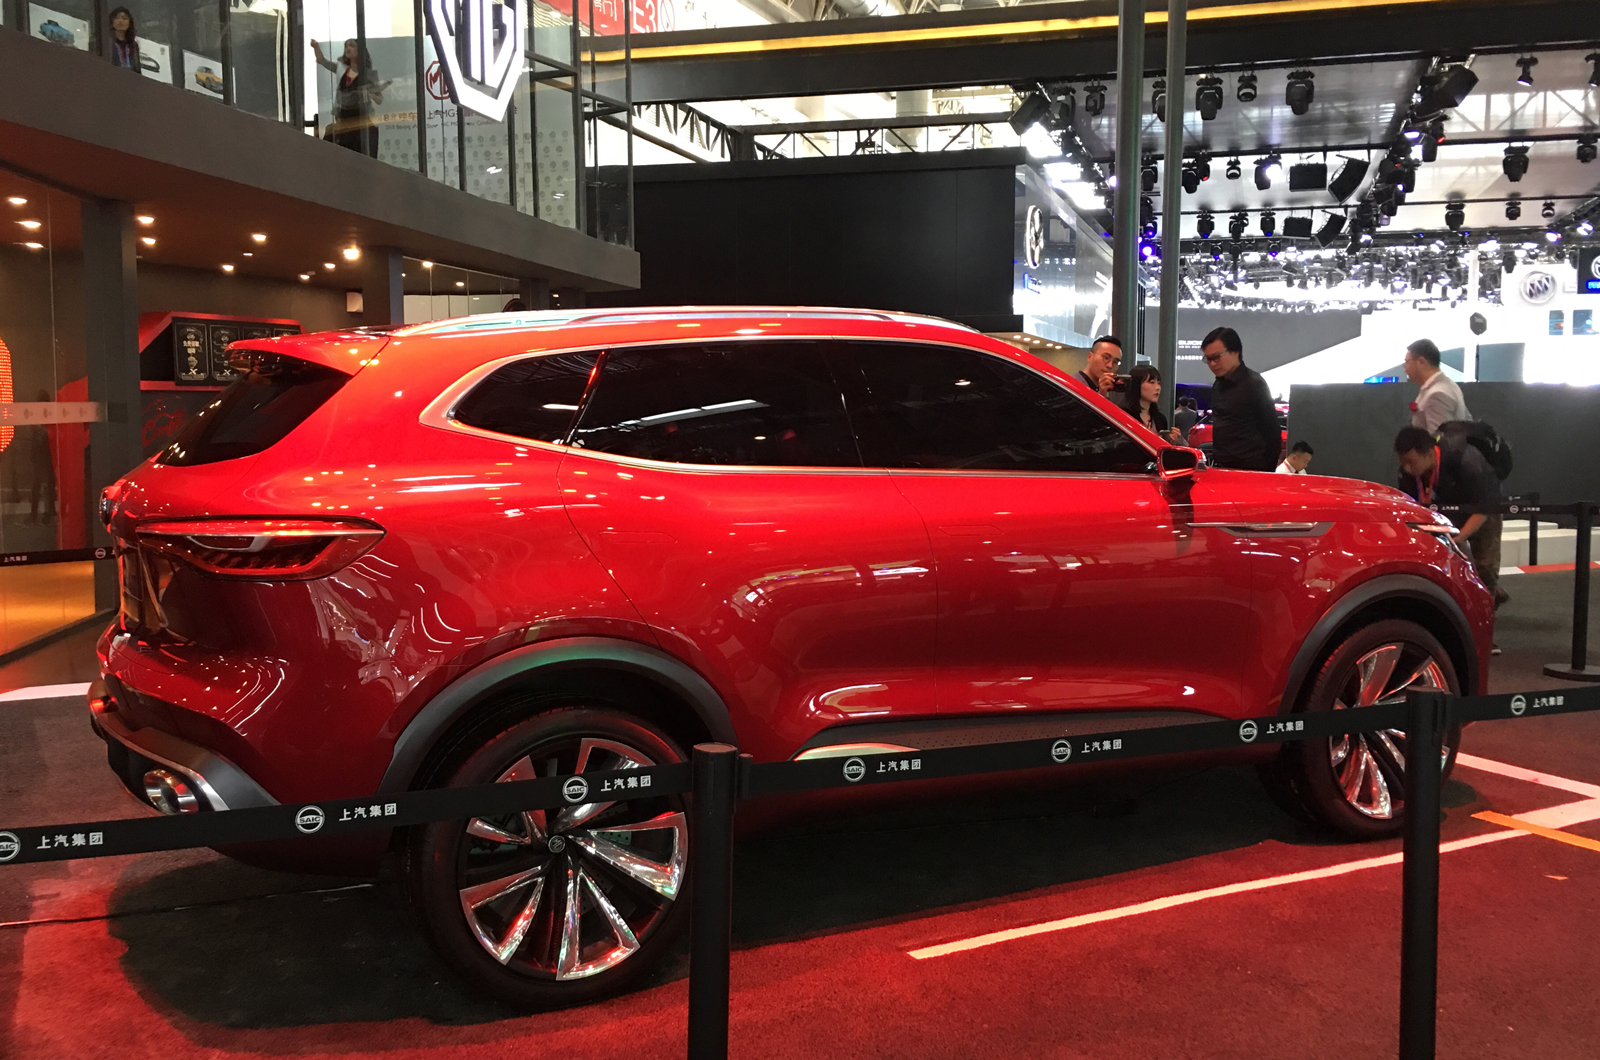 MG Motor to drive in electric SUV in India by first half of 2020